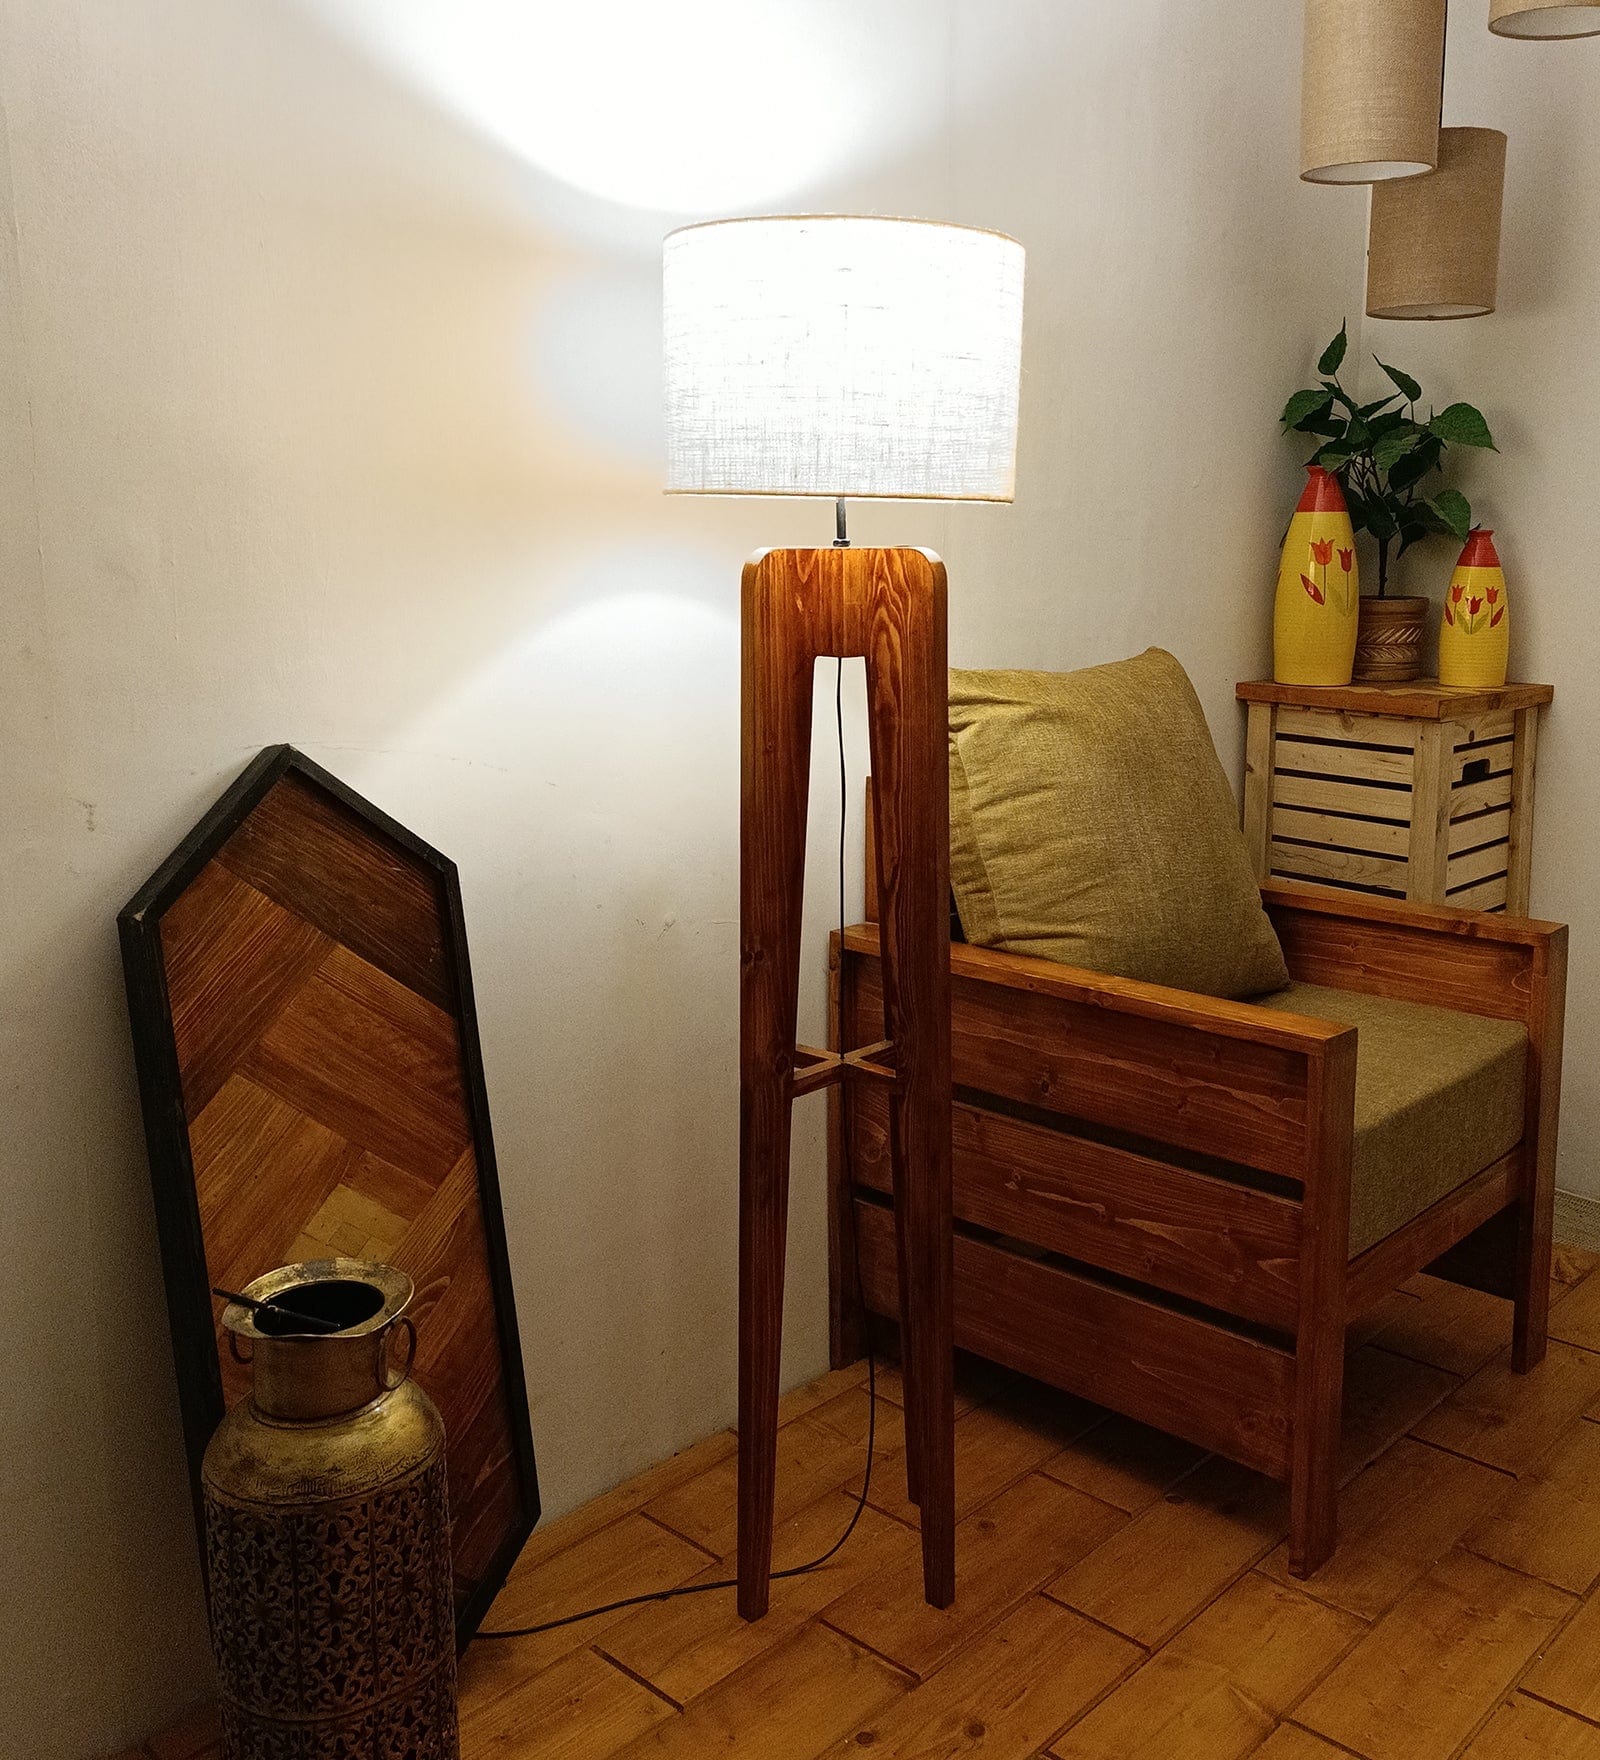 Jet Wooden Floor Lamp with Premium Beige Fabric Lampshade (BULB NOT INCLUDED)